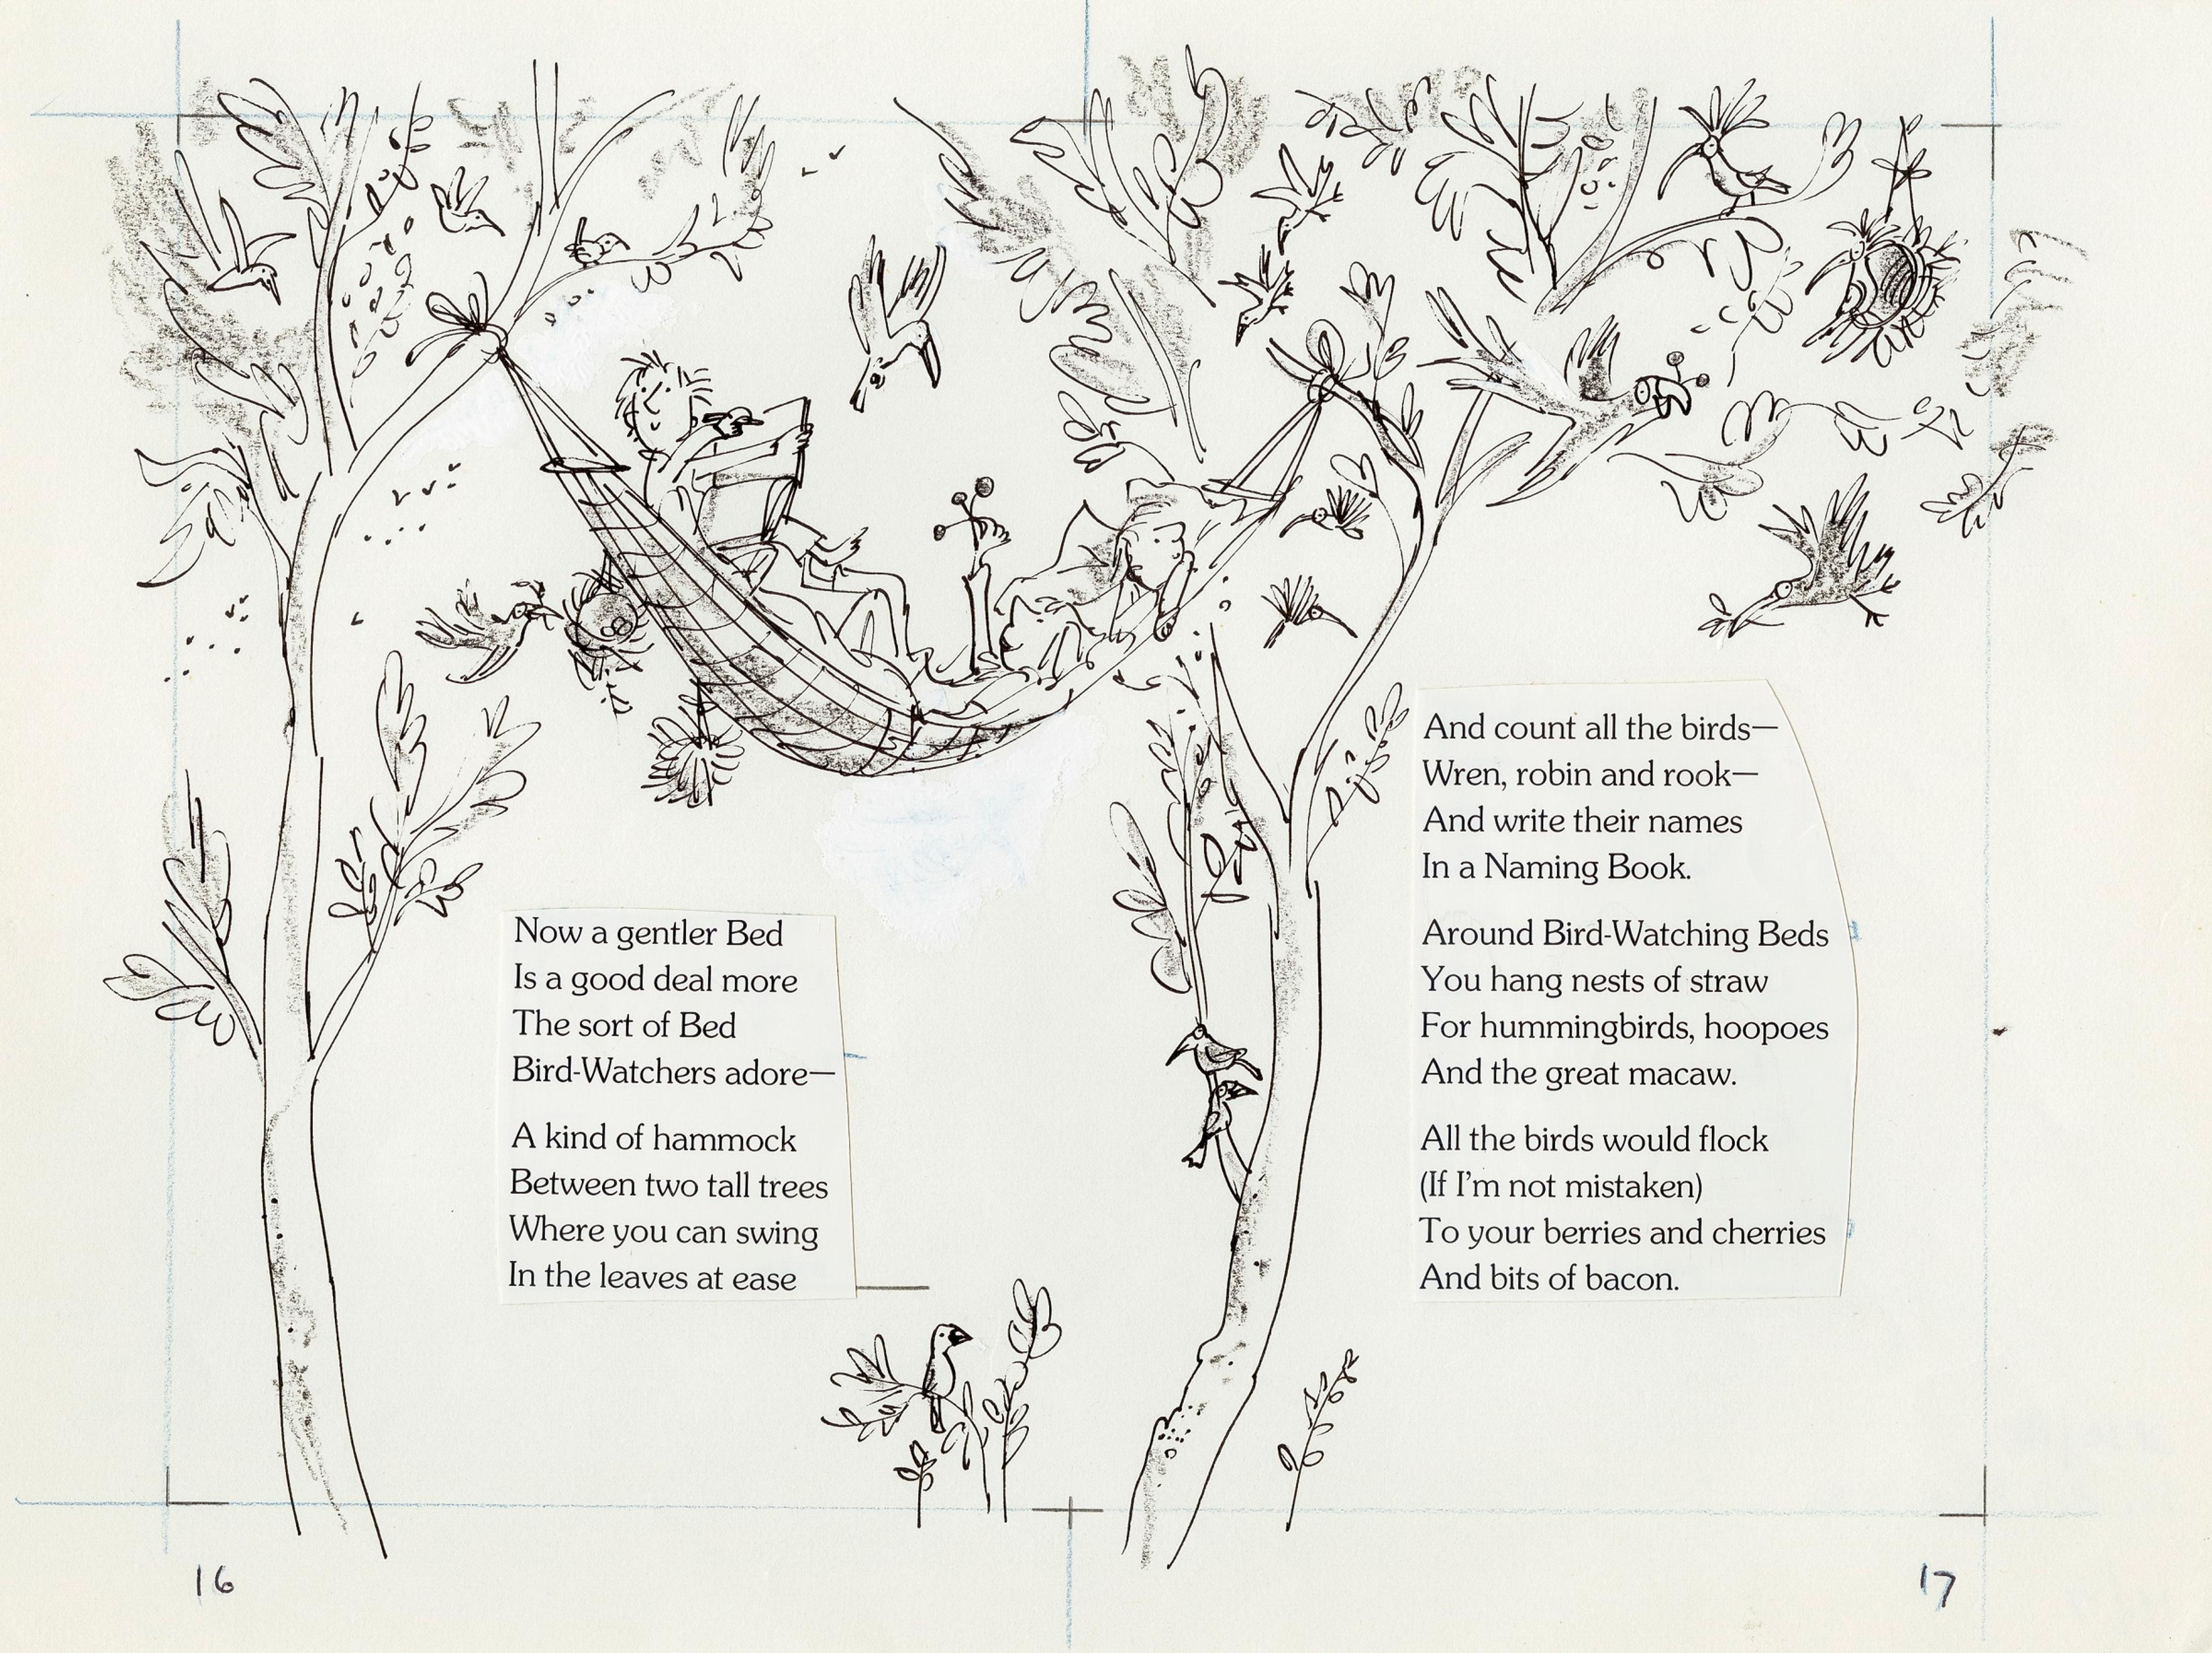 Page layout with illustration of children in a hammock surrounded by birds